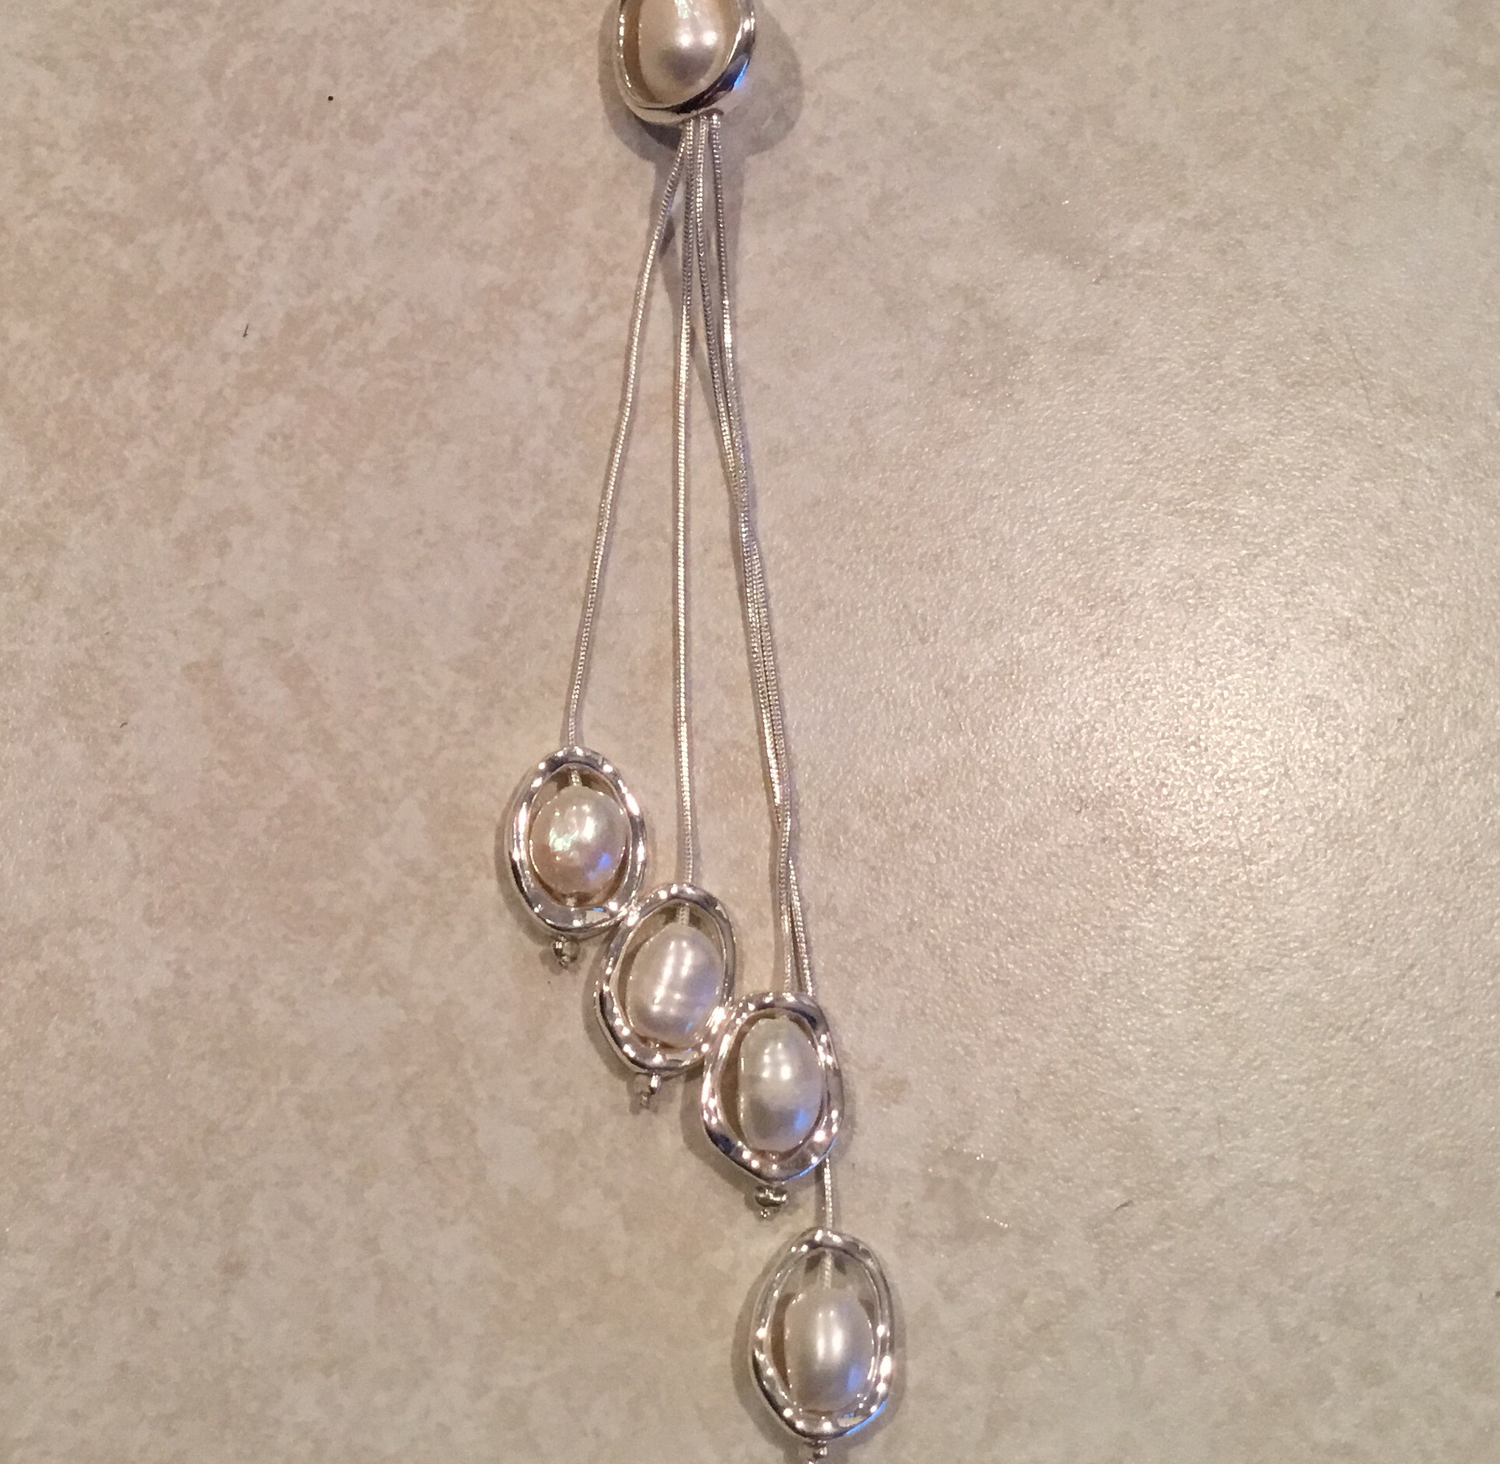 Silver Long Slinky With Pearl Drop Necklace 